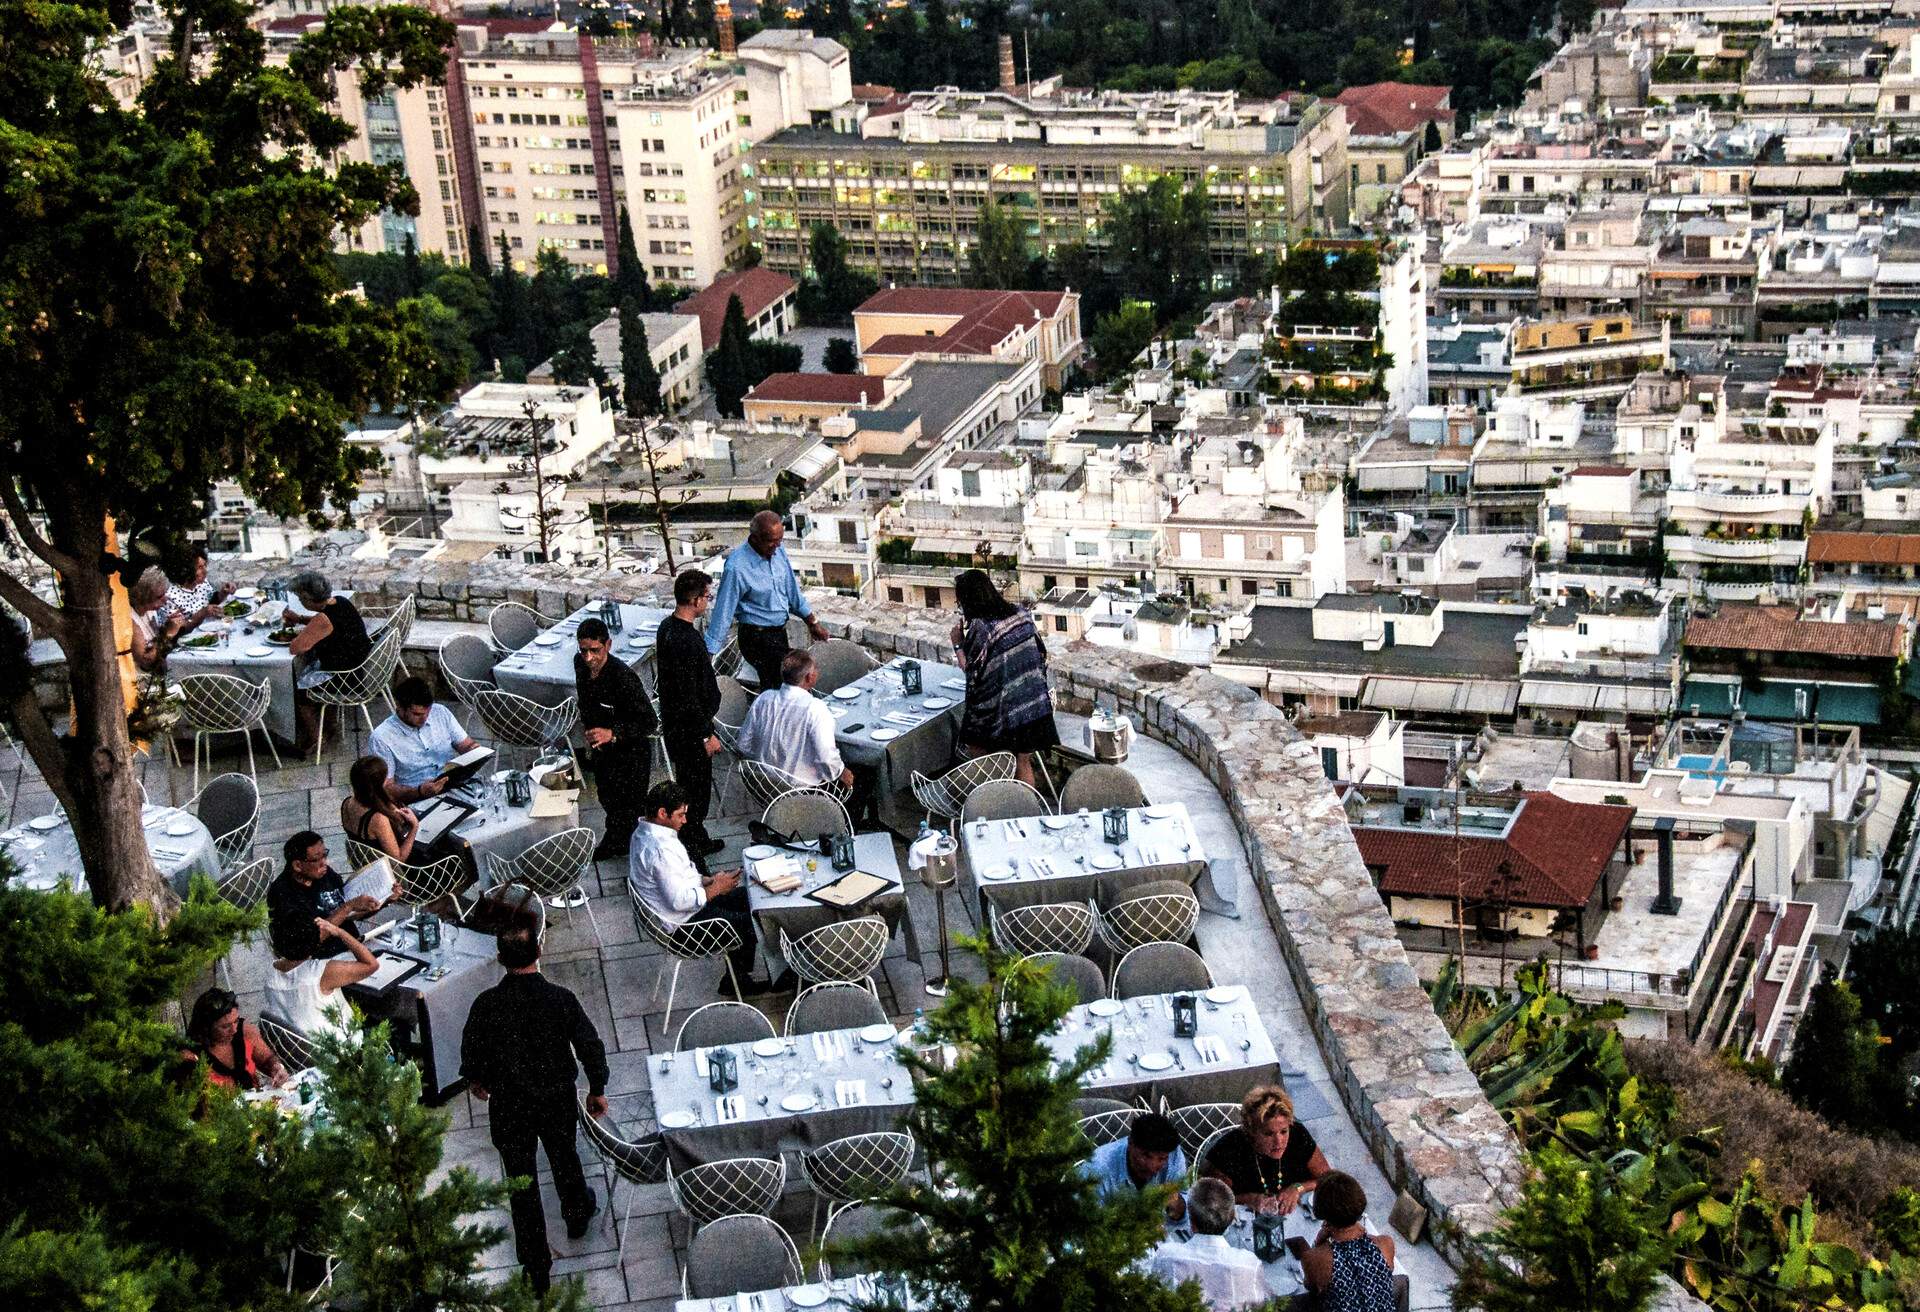 DEST_GREECE_ATHENS_THEME_RESTAURANT_ROOFTOP_GettyImages-899494640.jpg